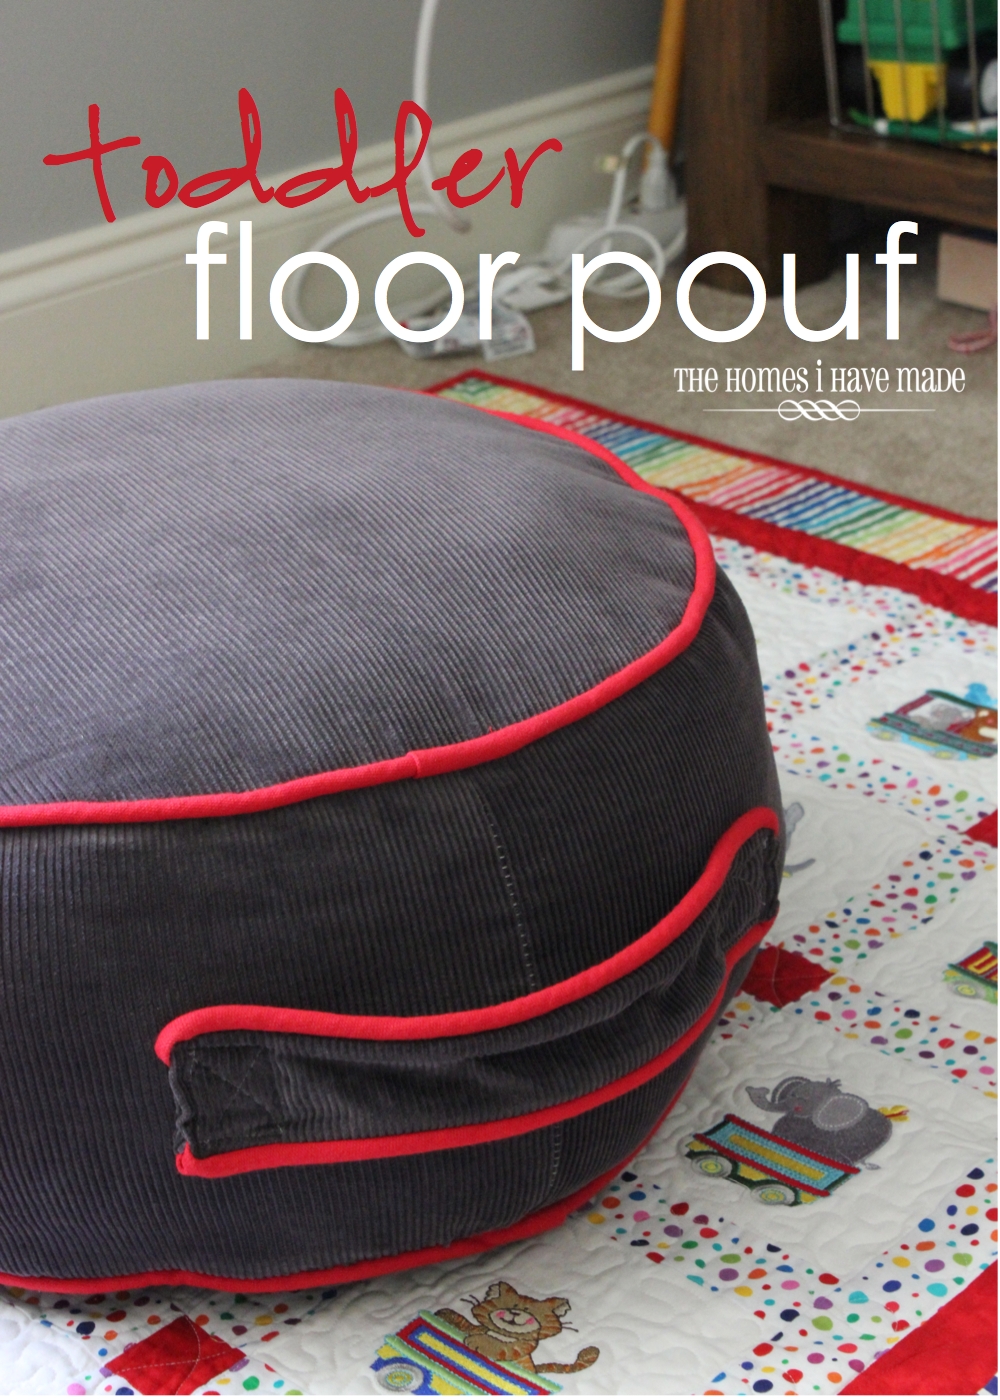 Toddler Floor Pouf The Homes I Have Made